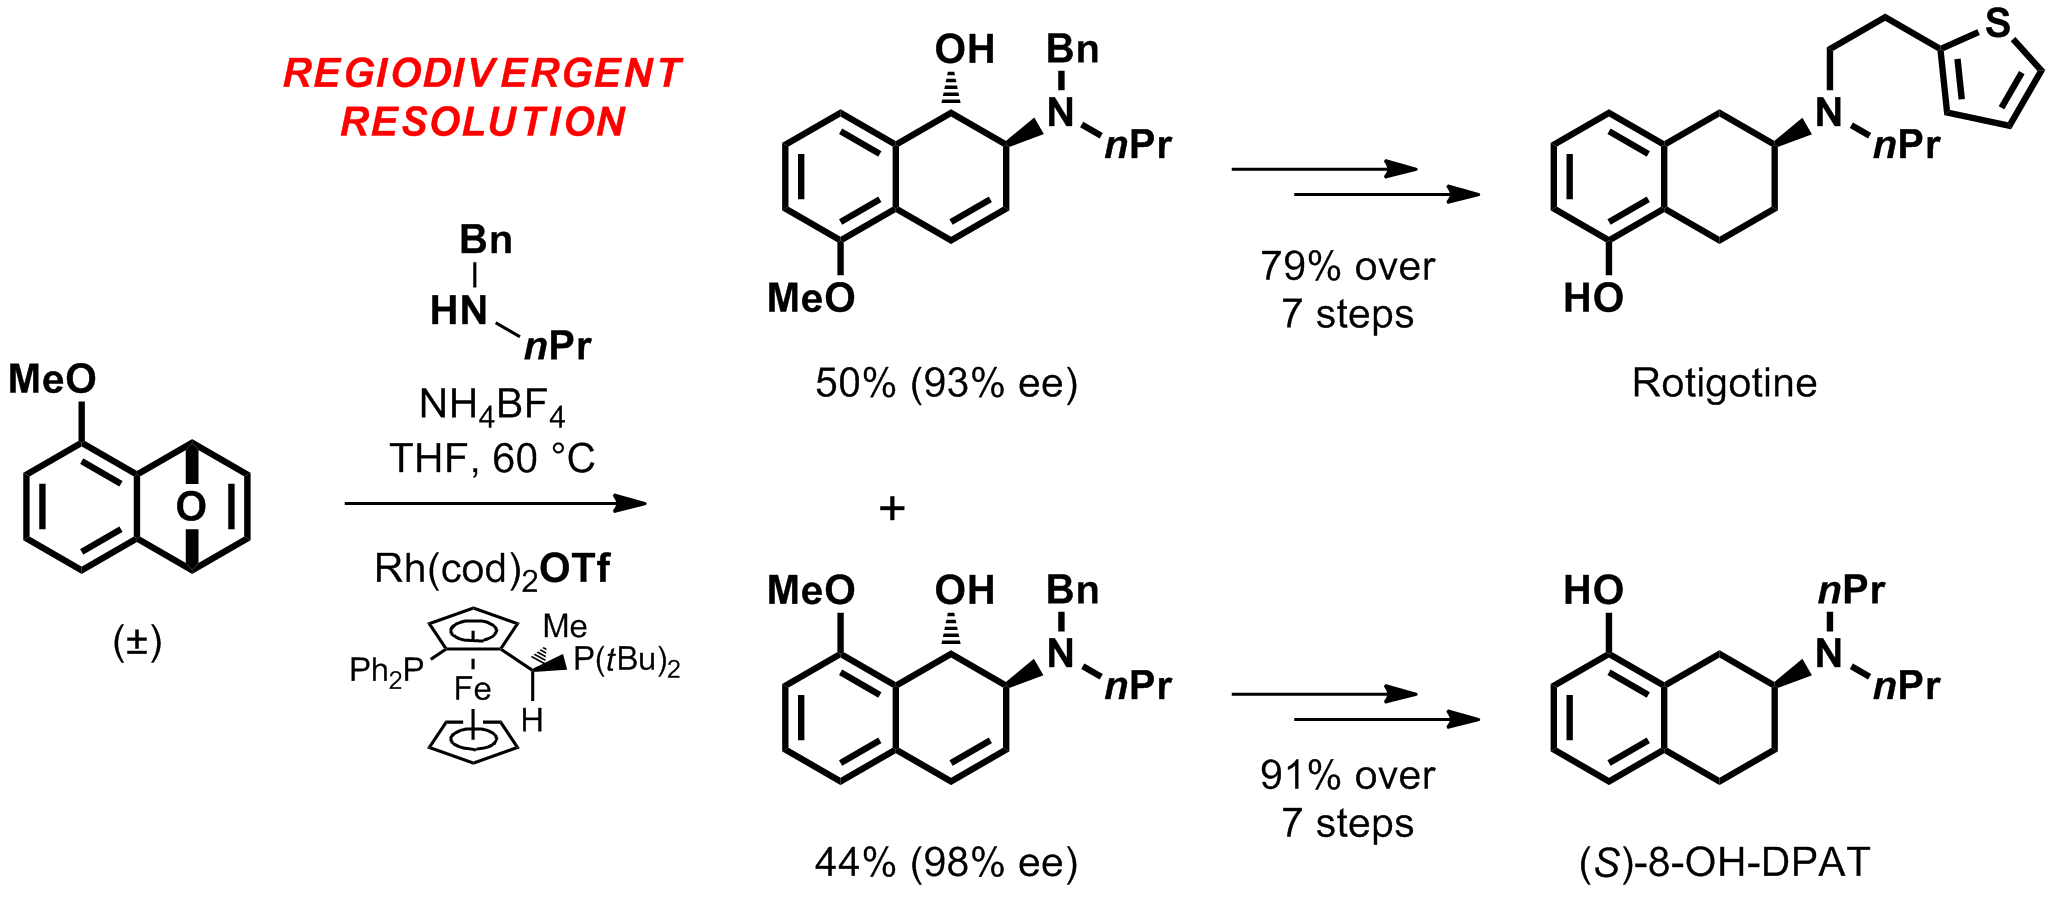 Abstract image for Practical Asymmetric Synthesis of Bioactive Aminotetralins from a Racemic Precursor using a Regiodivergent Resolution